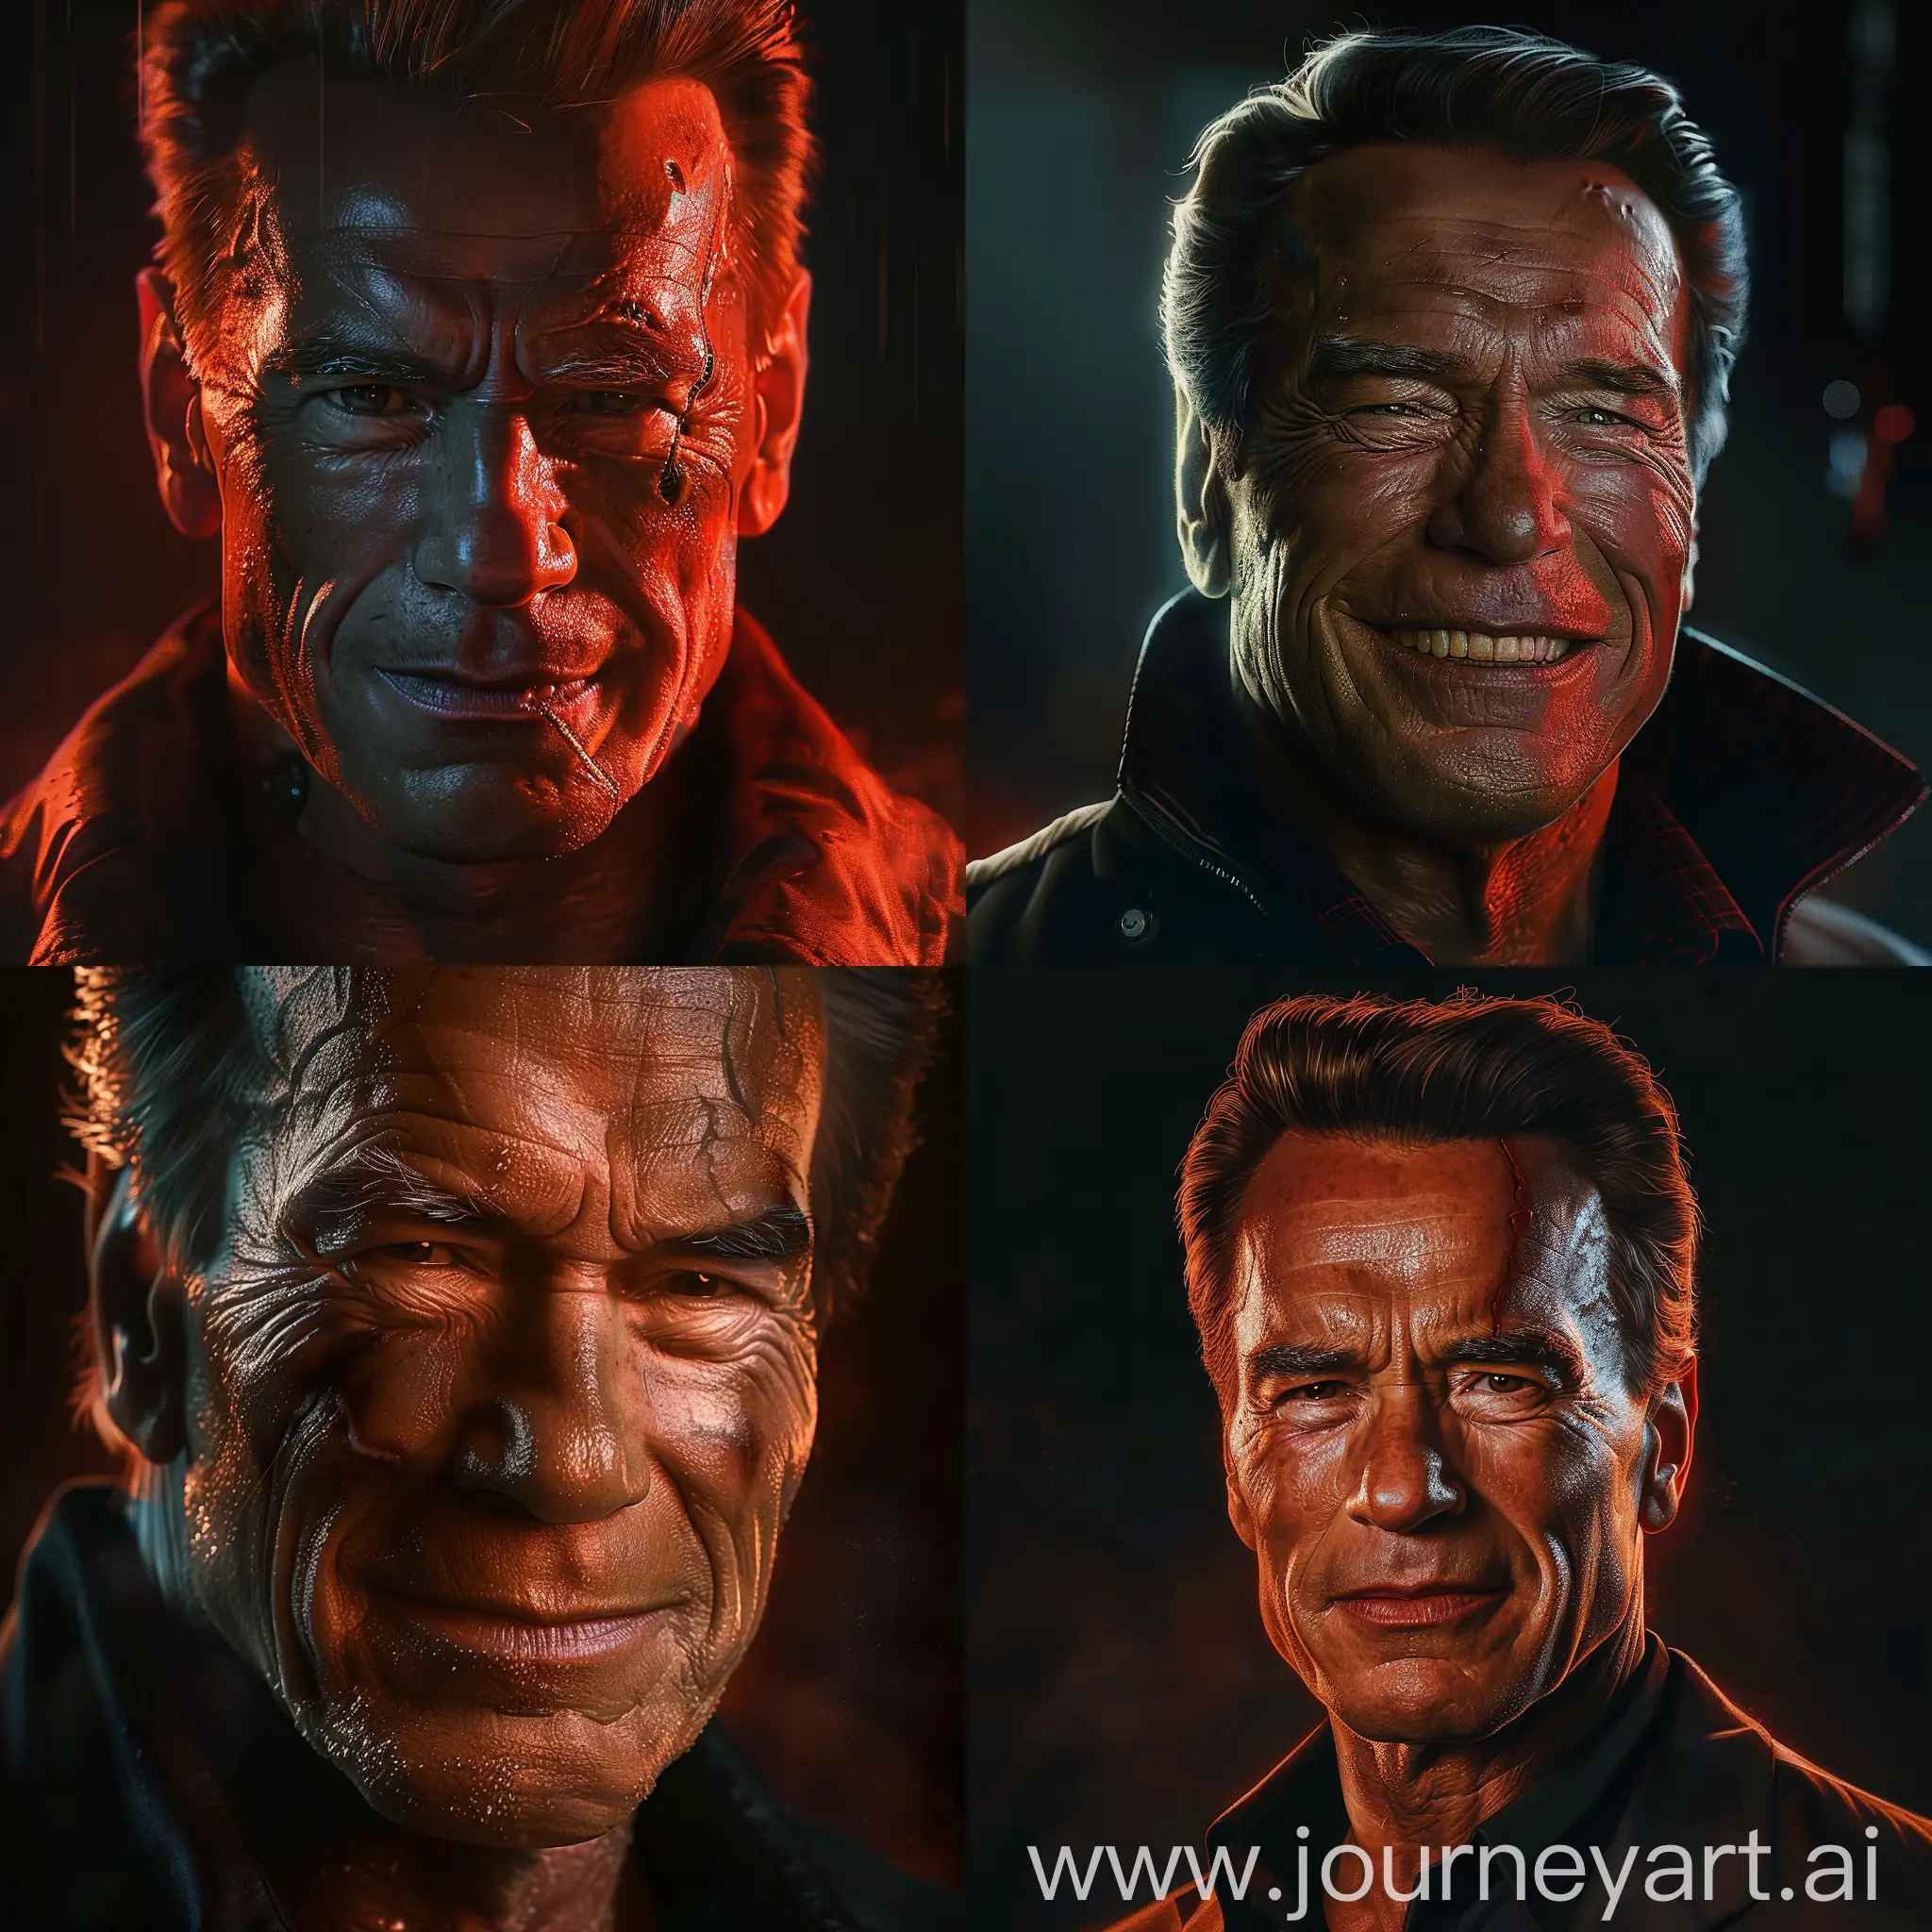 A detailed, realistic portrait of Arnold Schwarzenegger, turned slightly to the left. He has a villainous smile with a hint of devilishness in his eyes. The lighting is high contrast, with a reddish color tone creating a foreboding atmosphere. Wrinkles and skin texture are highly detailed to portray his age and experience. Include a subtle hint of a costume element from one of his iconic villainous roles. Focus on Arnold from the waist up. Background should be dark and out of focus. No text overlay.